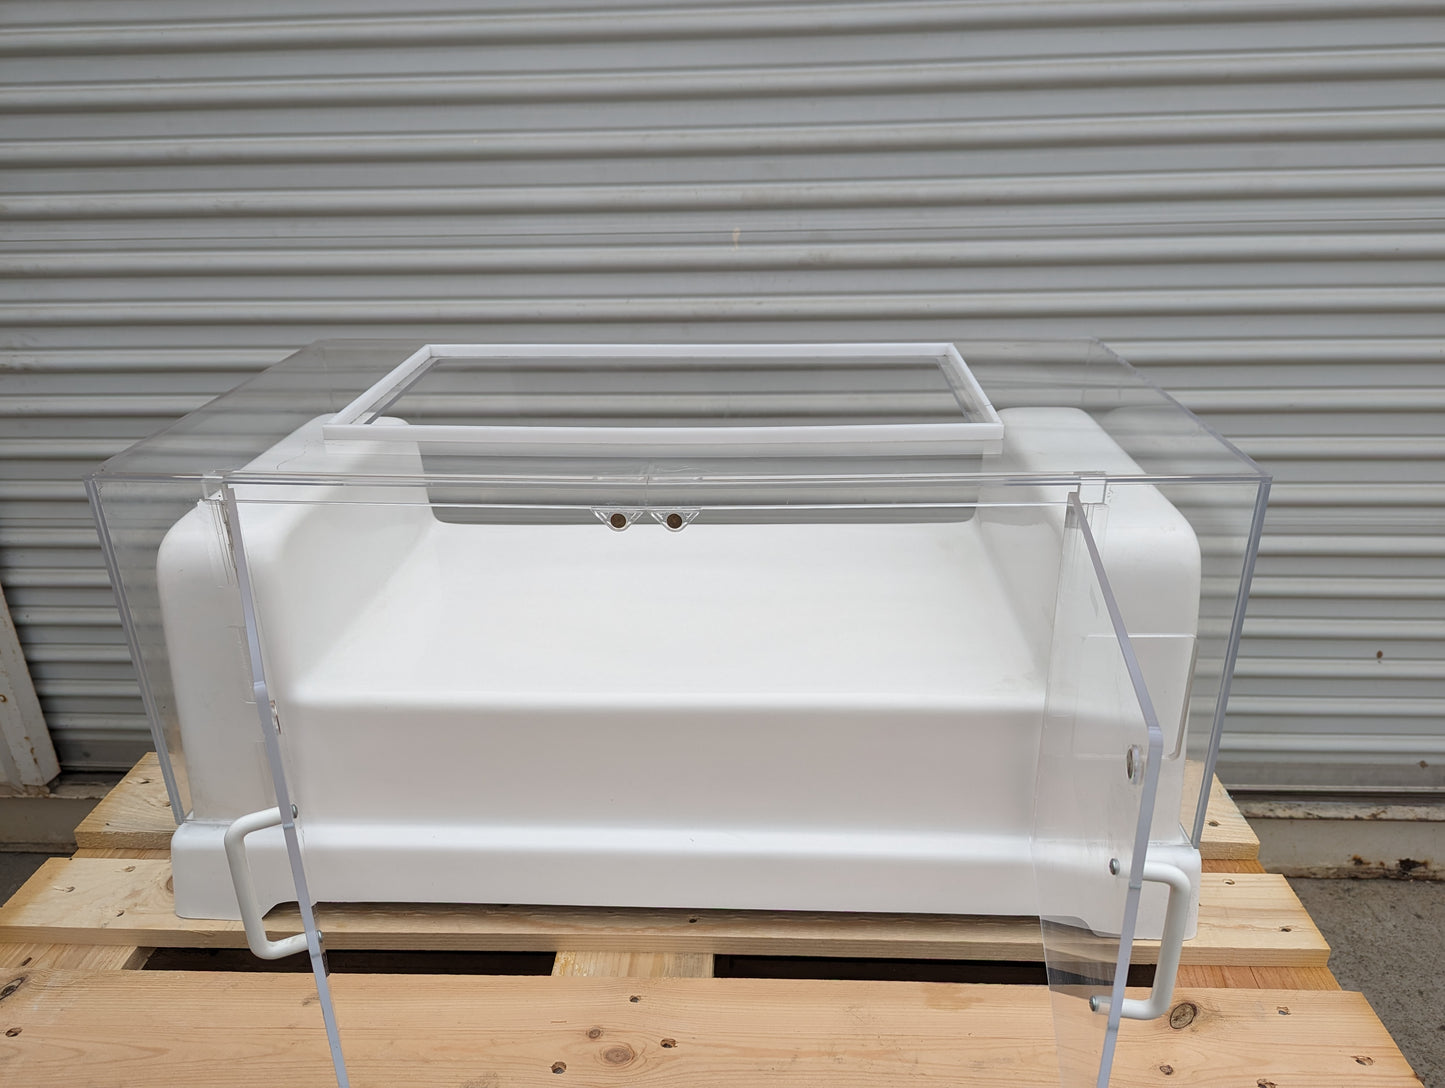 USED 2 Bar and 3 Bar Plexiglass Safety Cover